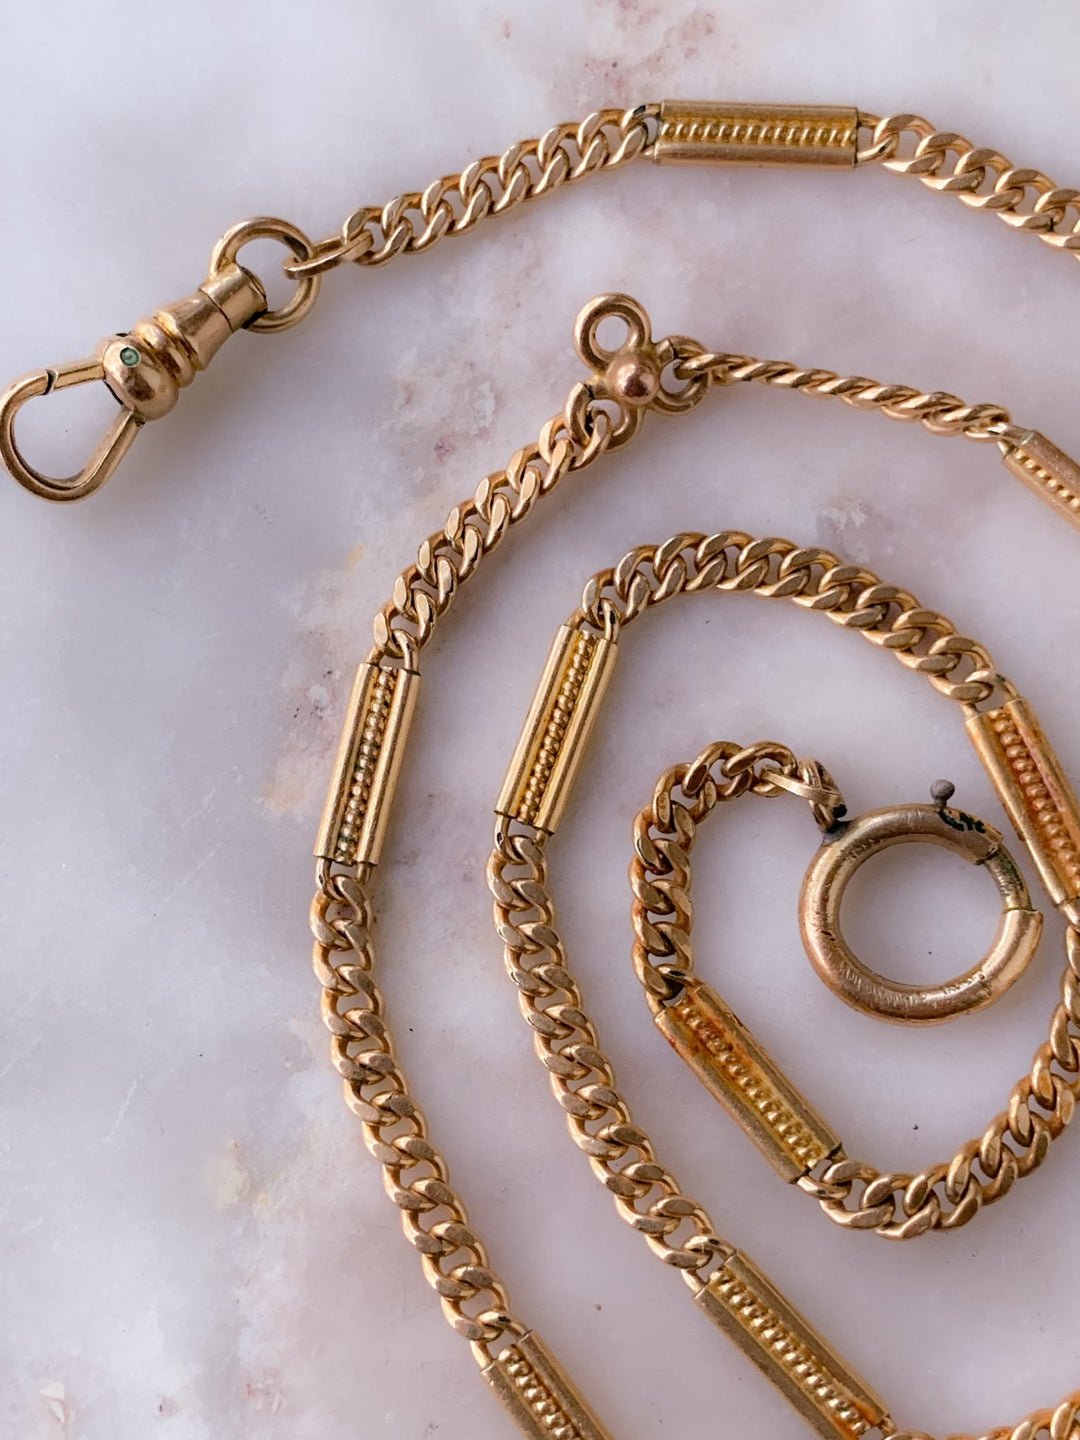 Rolled Gold Watch Chain c.1880